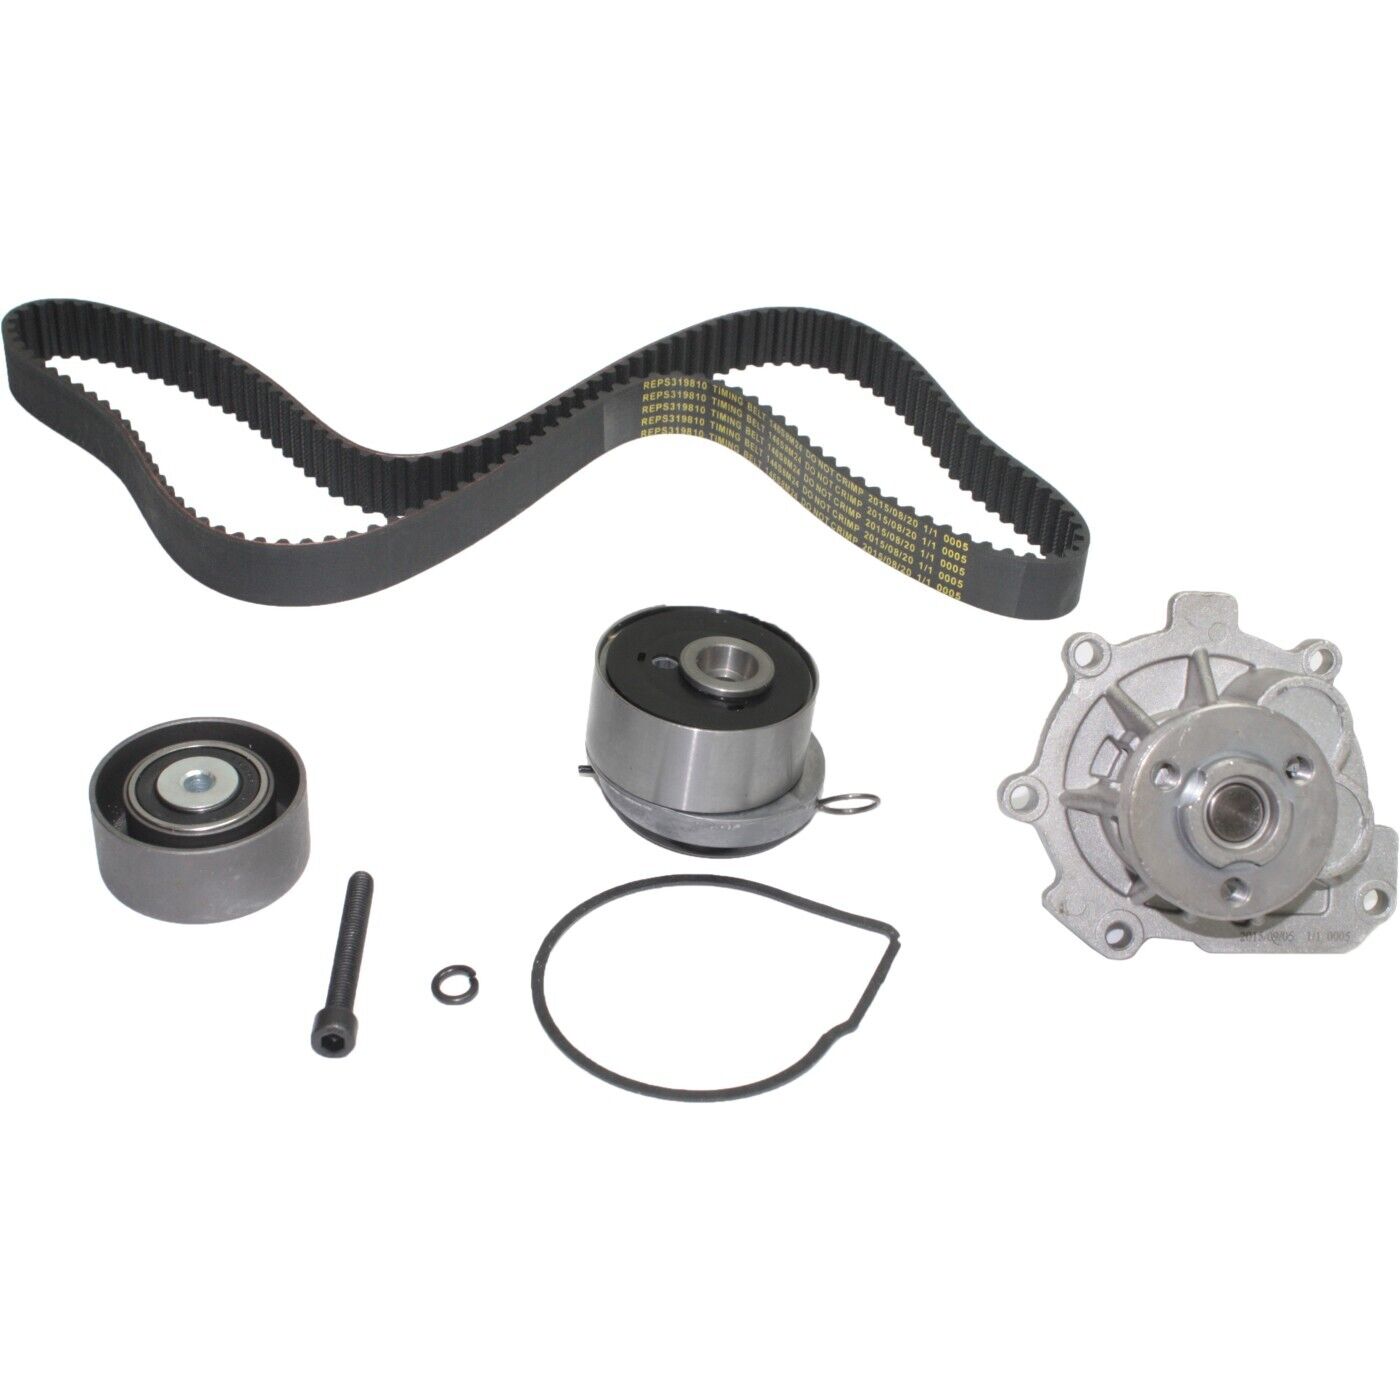 Timing Belt & Water Pump Kit For 09-14 Sonic Aveo5 Cruze Astra G3 1.6L 1.8L DOHC